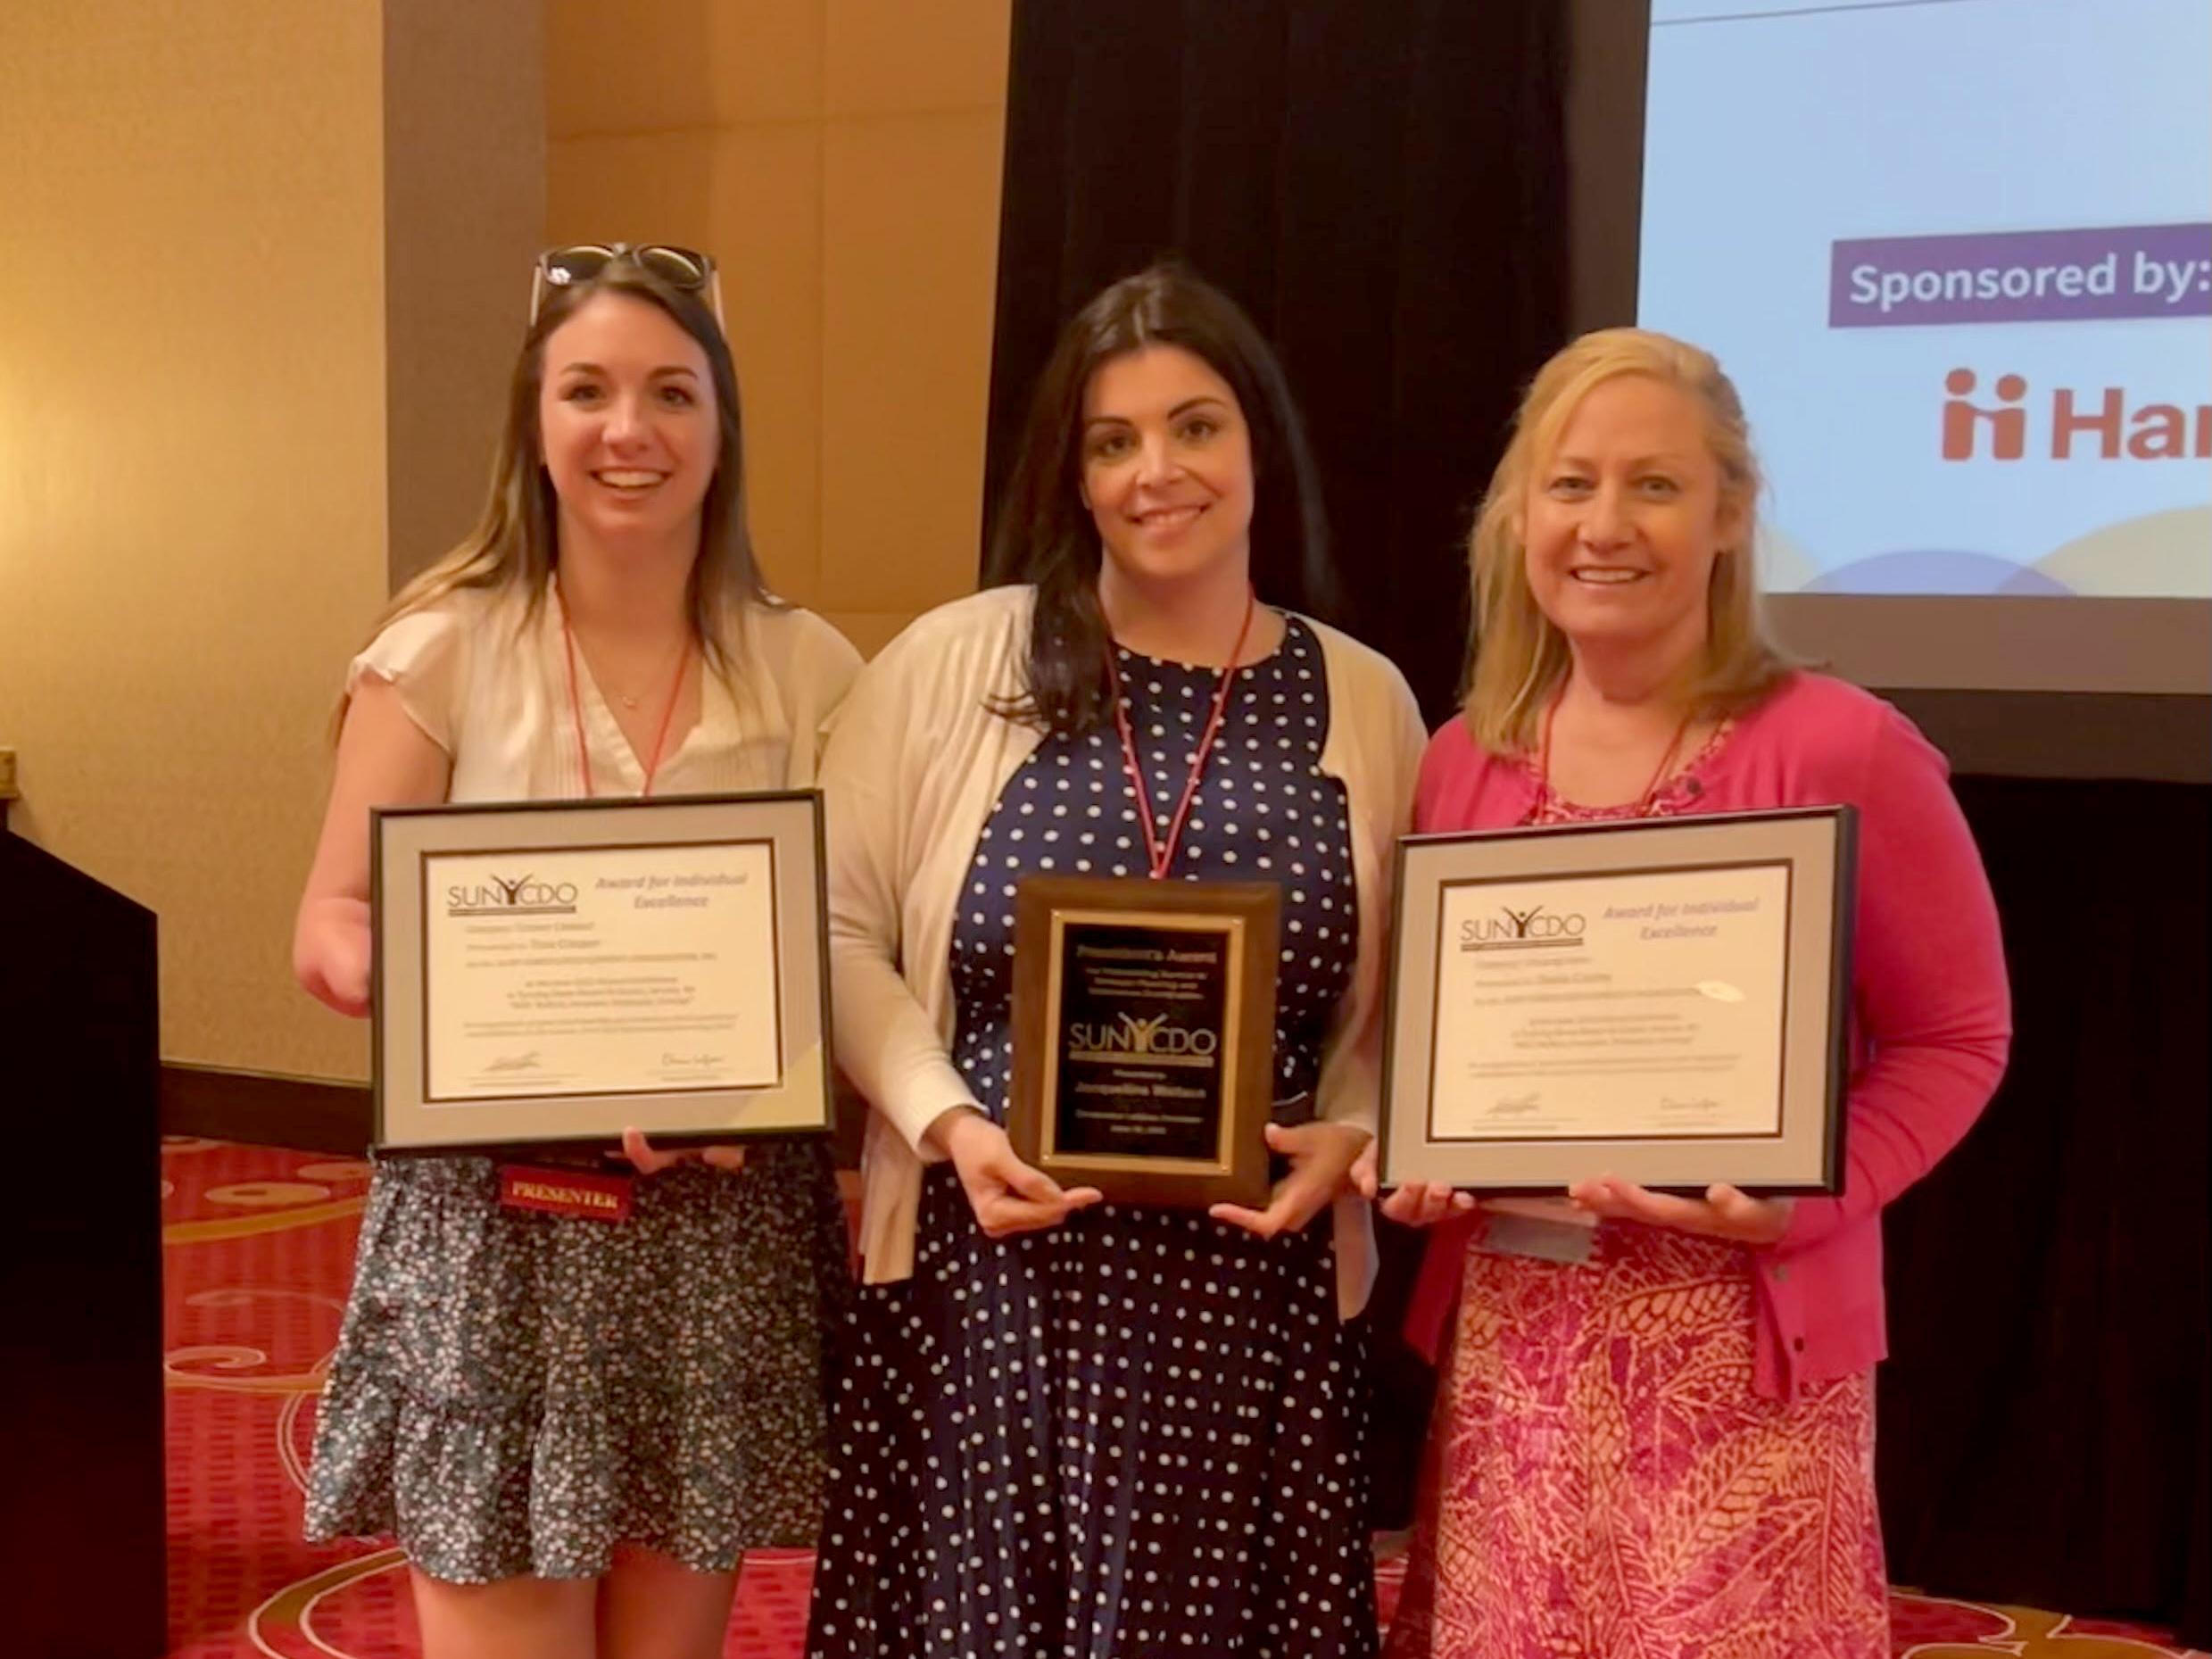 Staff members Tina Cooper, Jacqueline Wallace and Sheila Cooley received statewide awards in support of career services and experiential learning